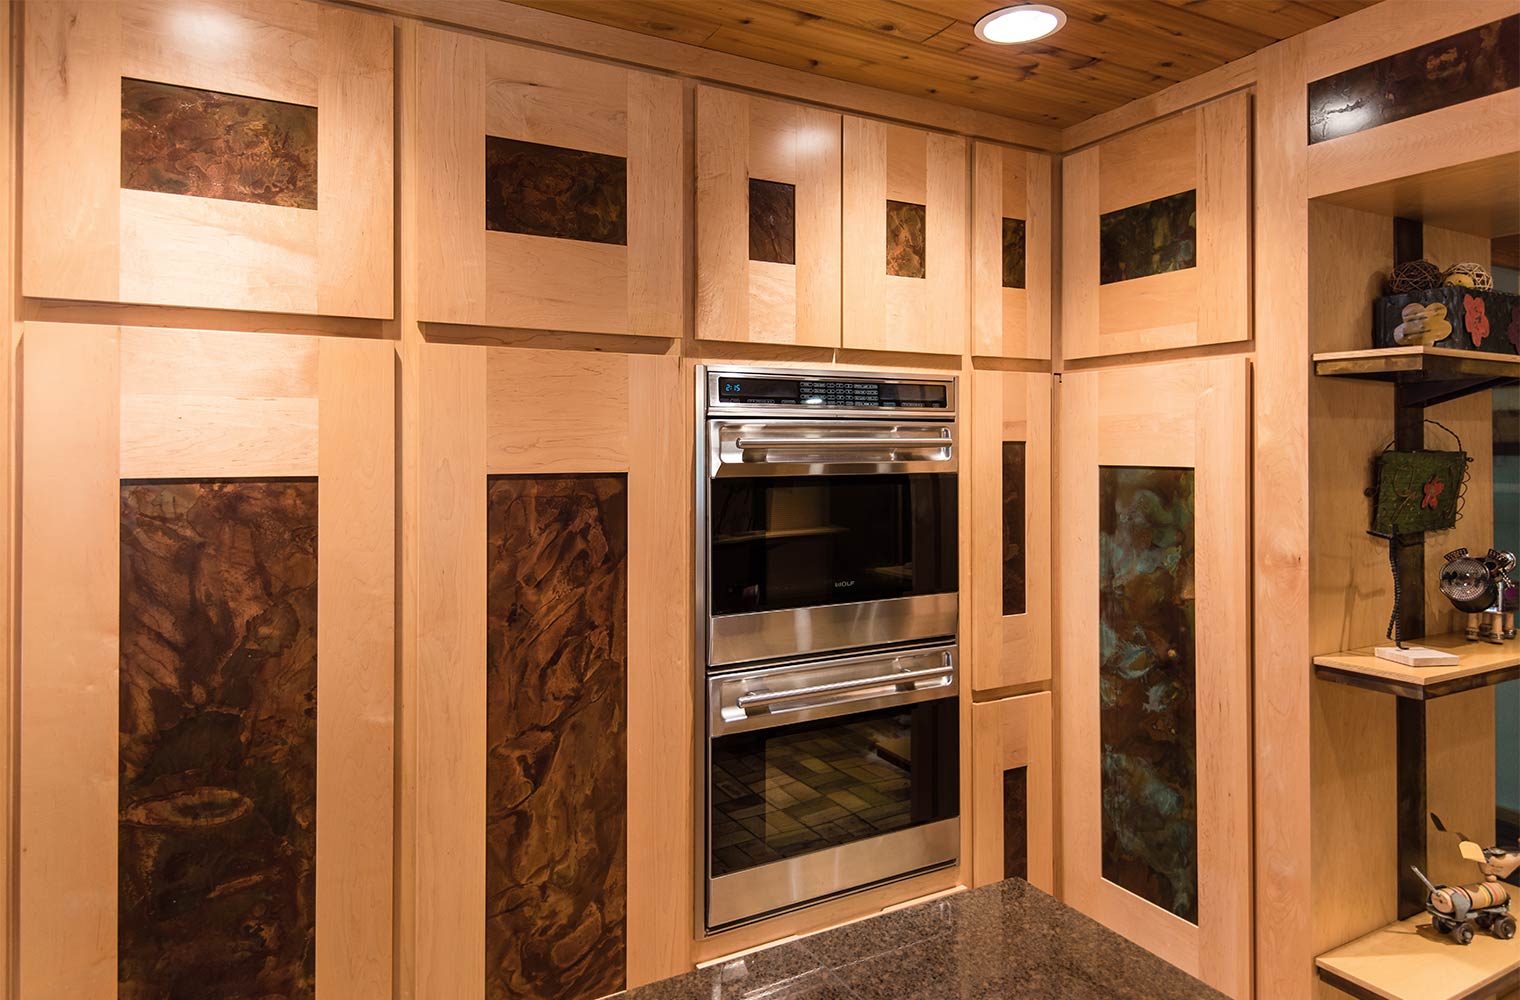 custom maple cabinets with steel patina inlays surround double oven in Johnston kitchen by remodeler Silent Rivers